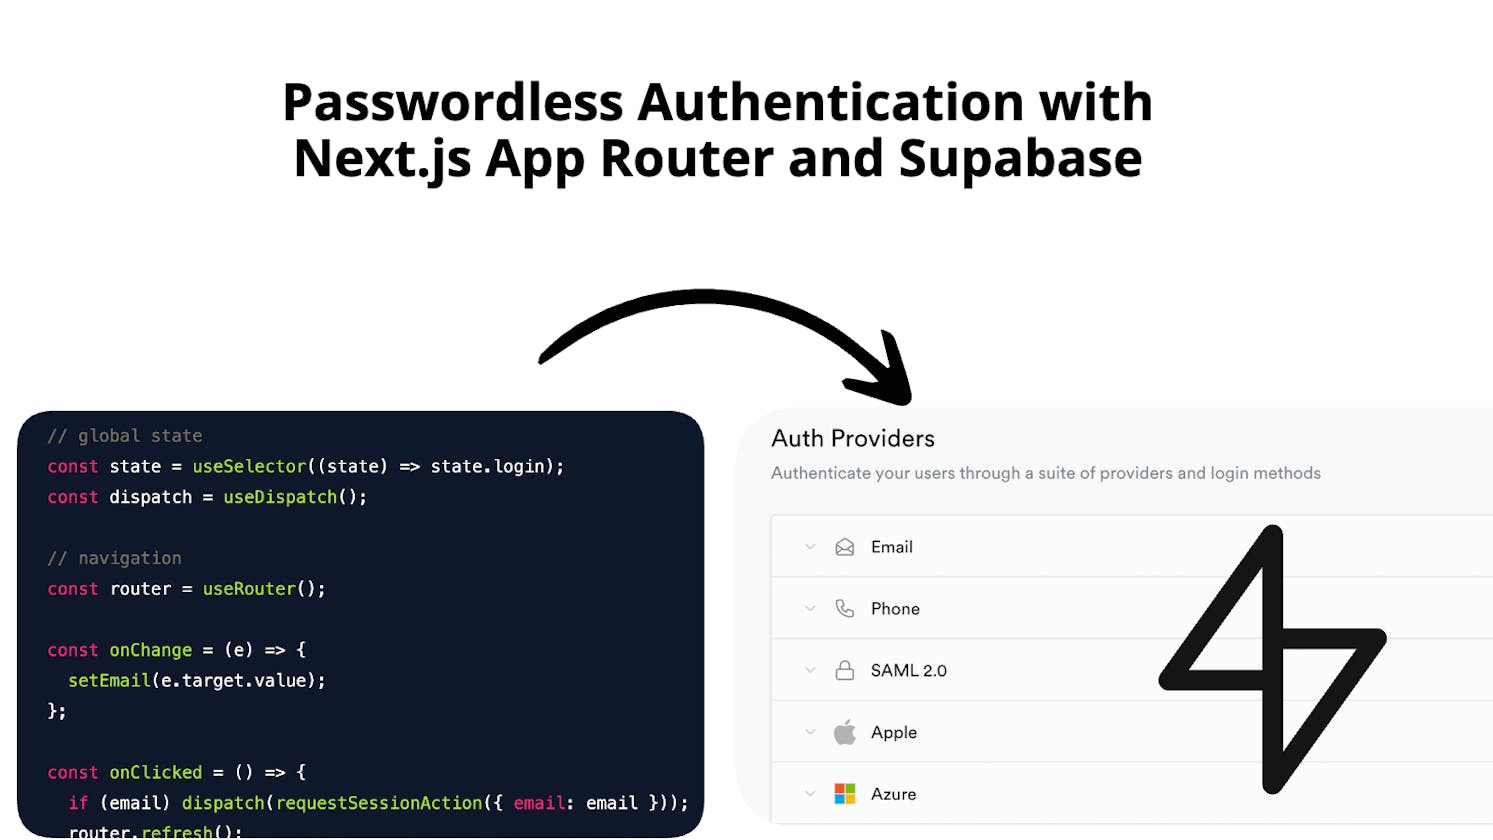 Passwordless Authentication with Next.js App Router and Supabase